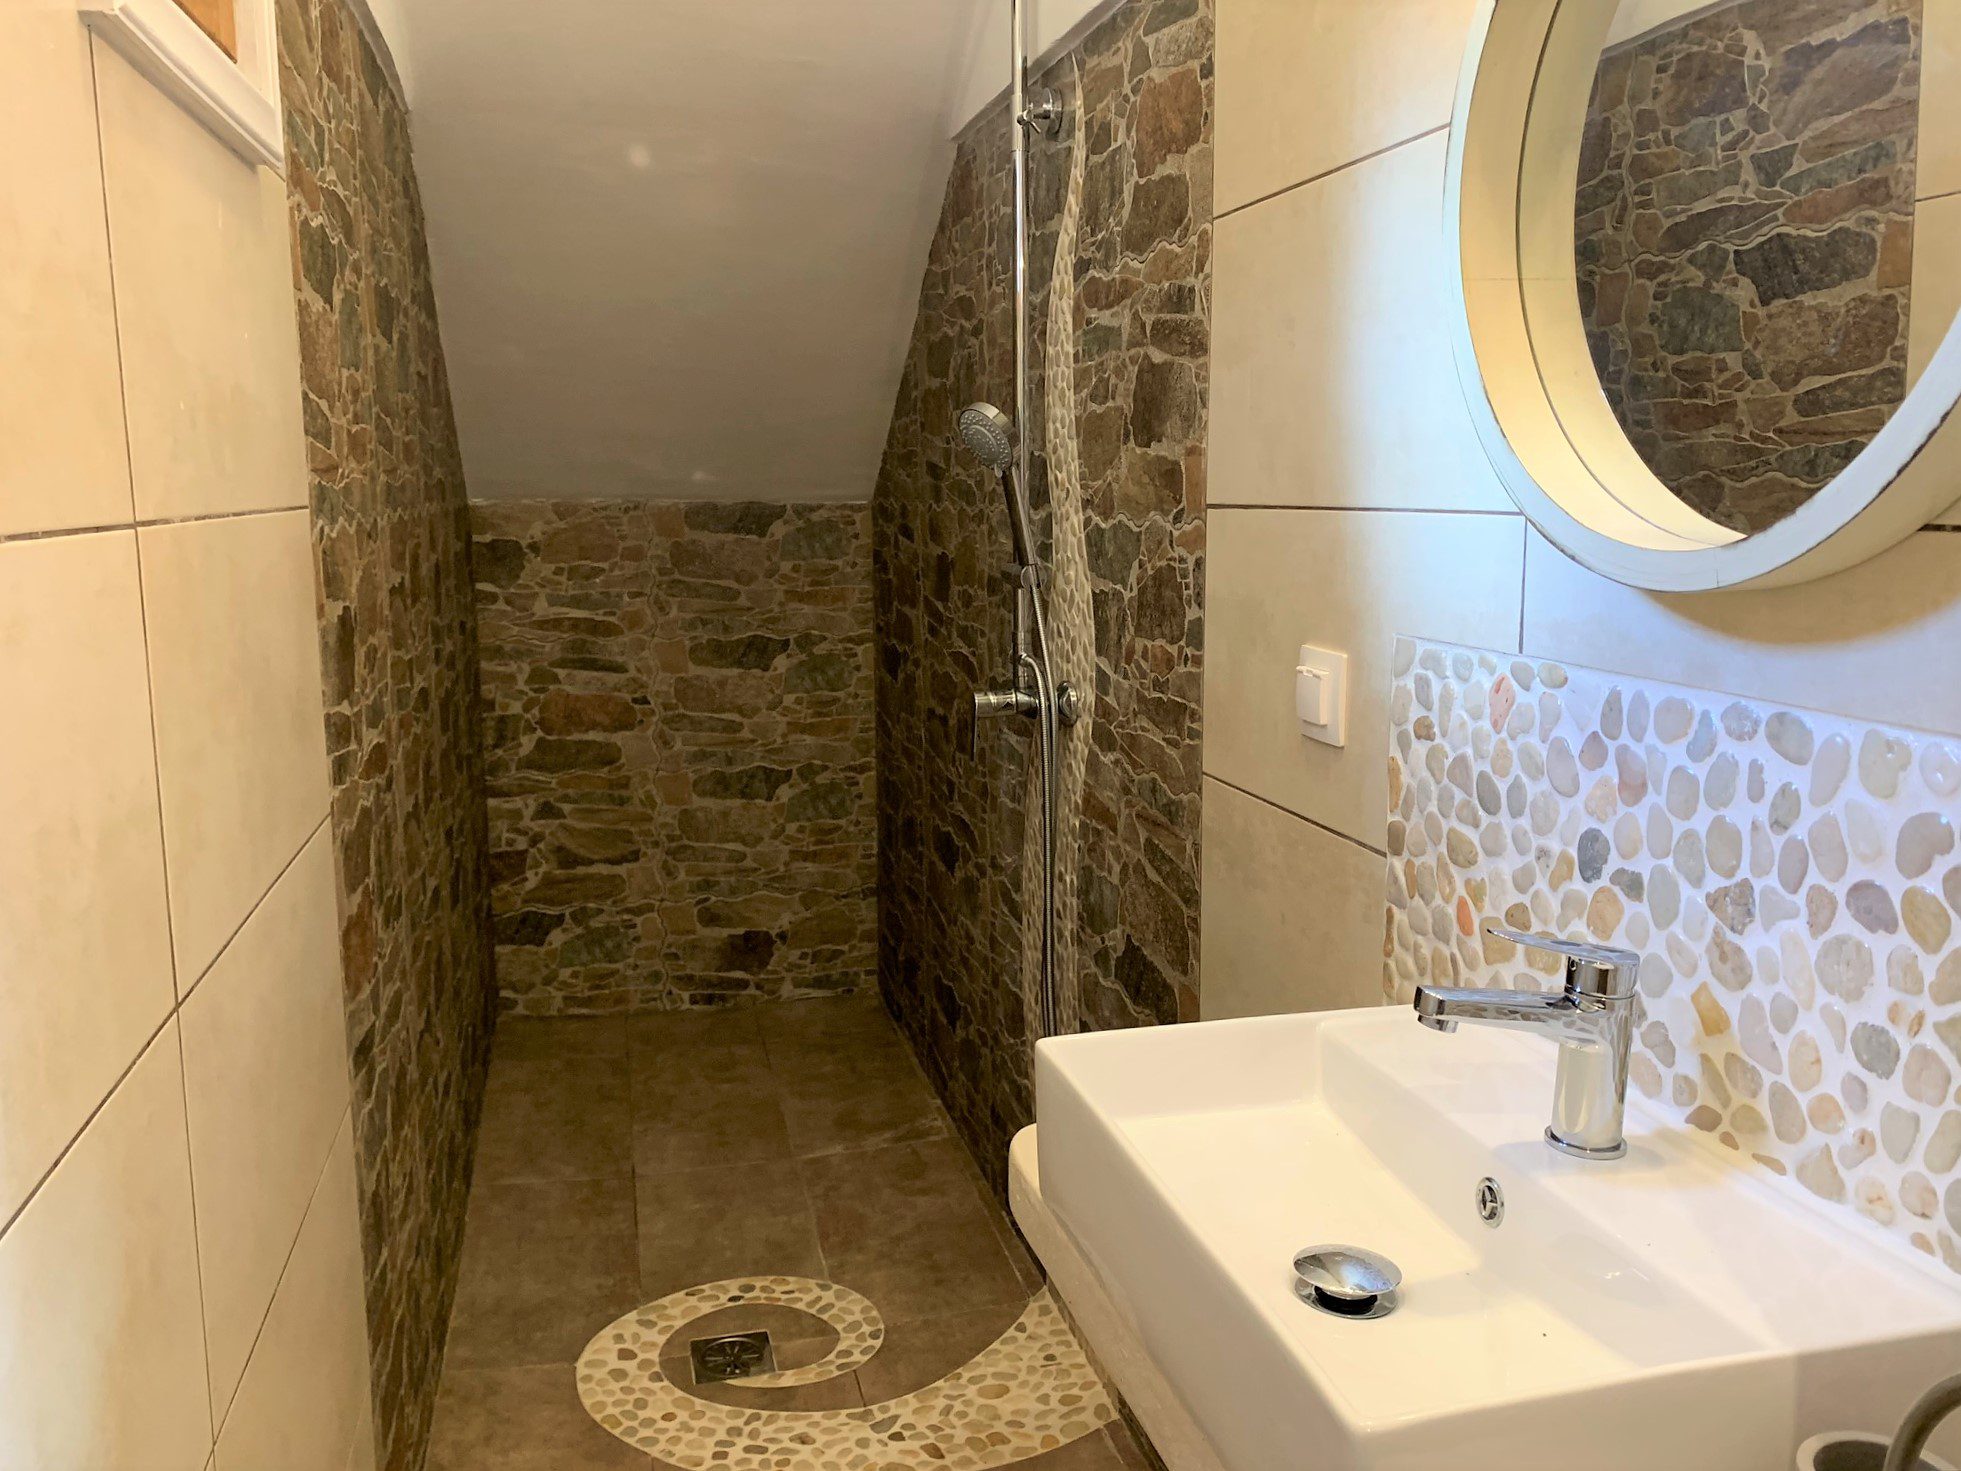 Bathroom of holiday apartments for rent Ithaca Greece, Kioni